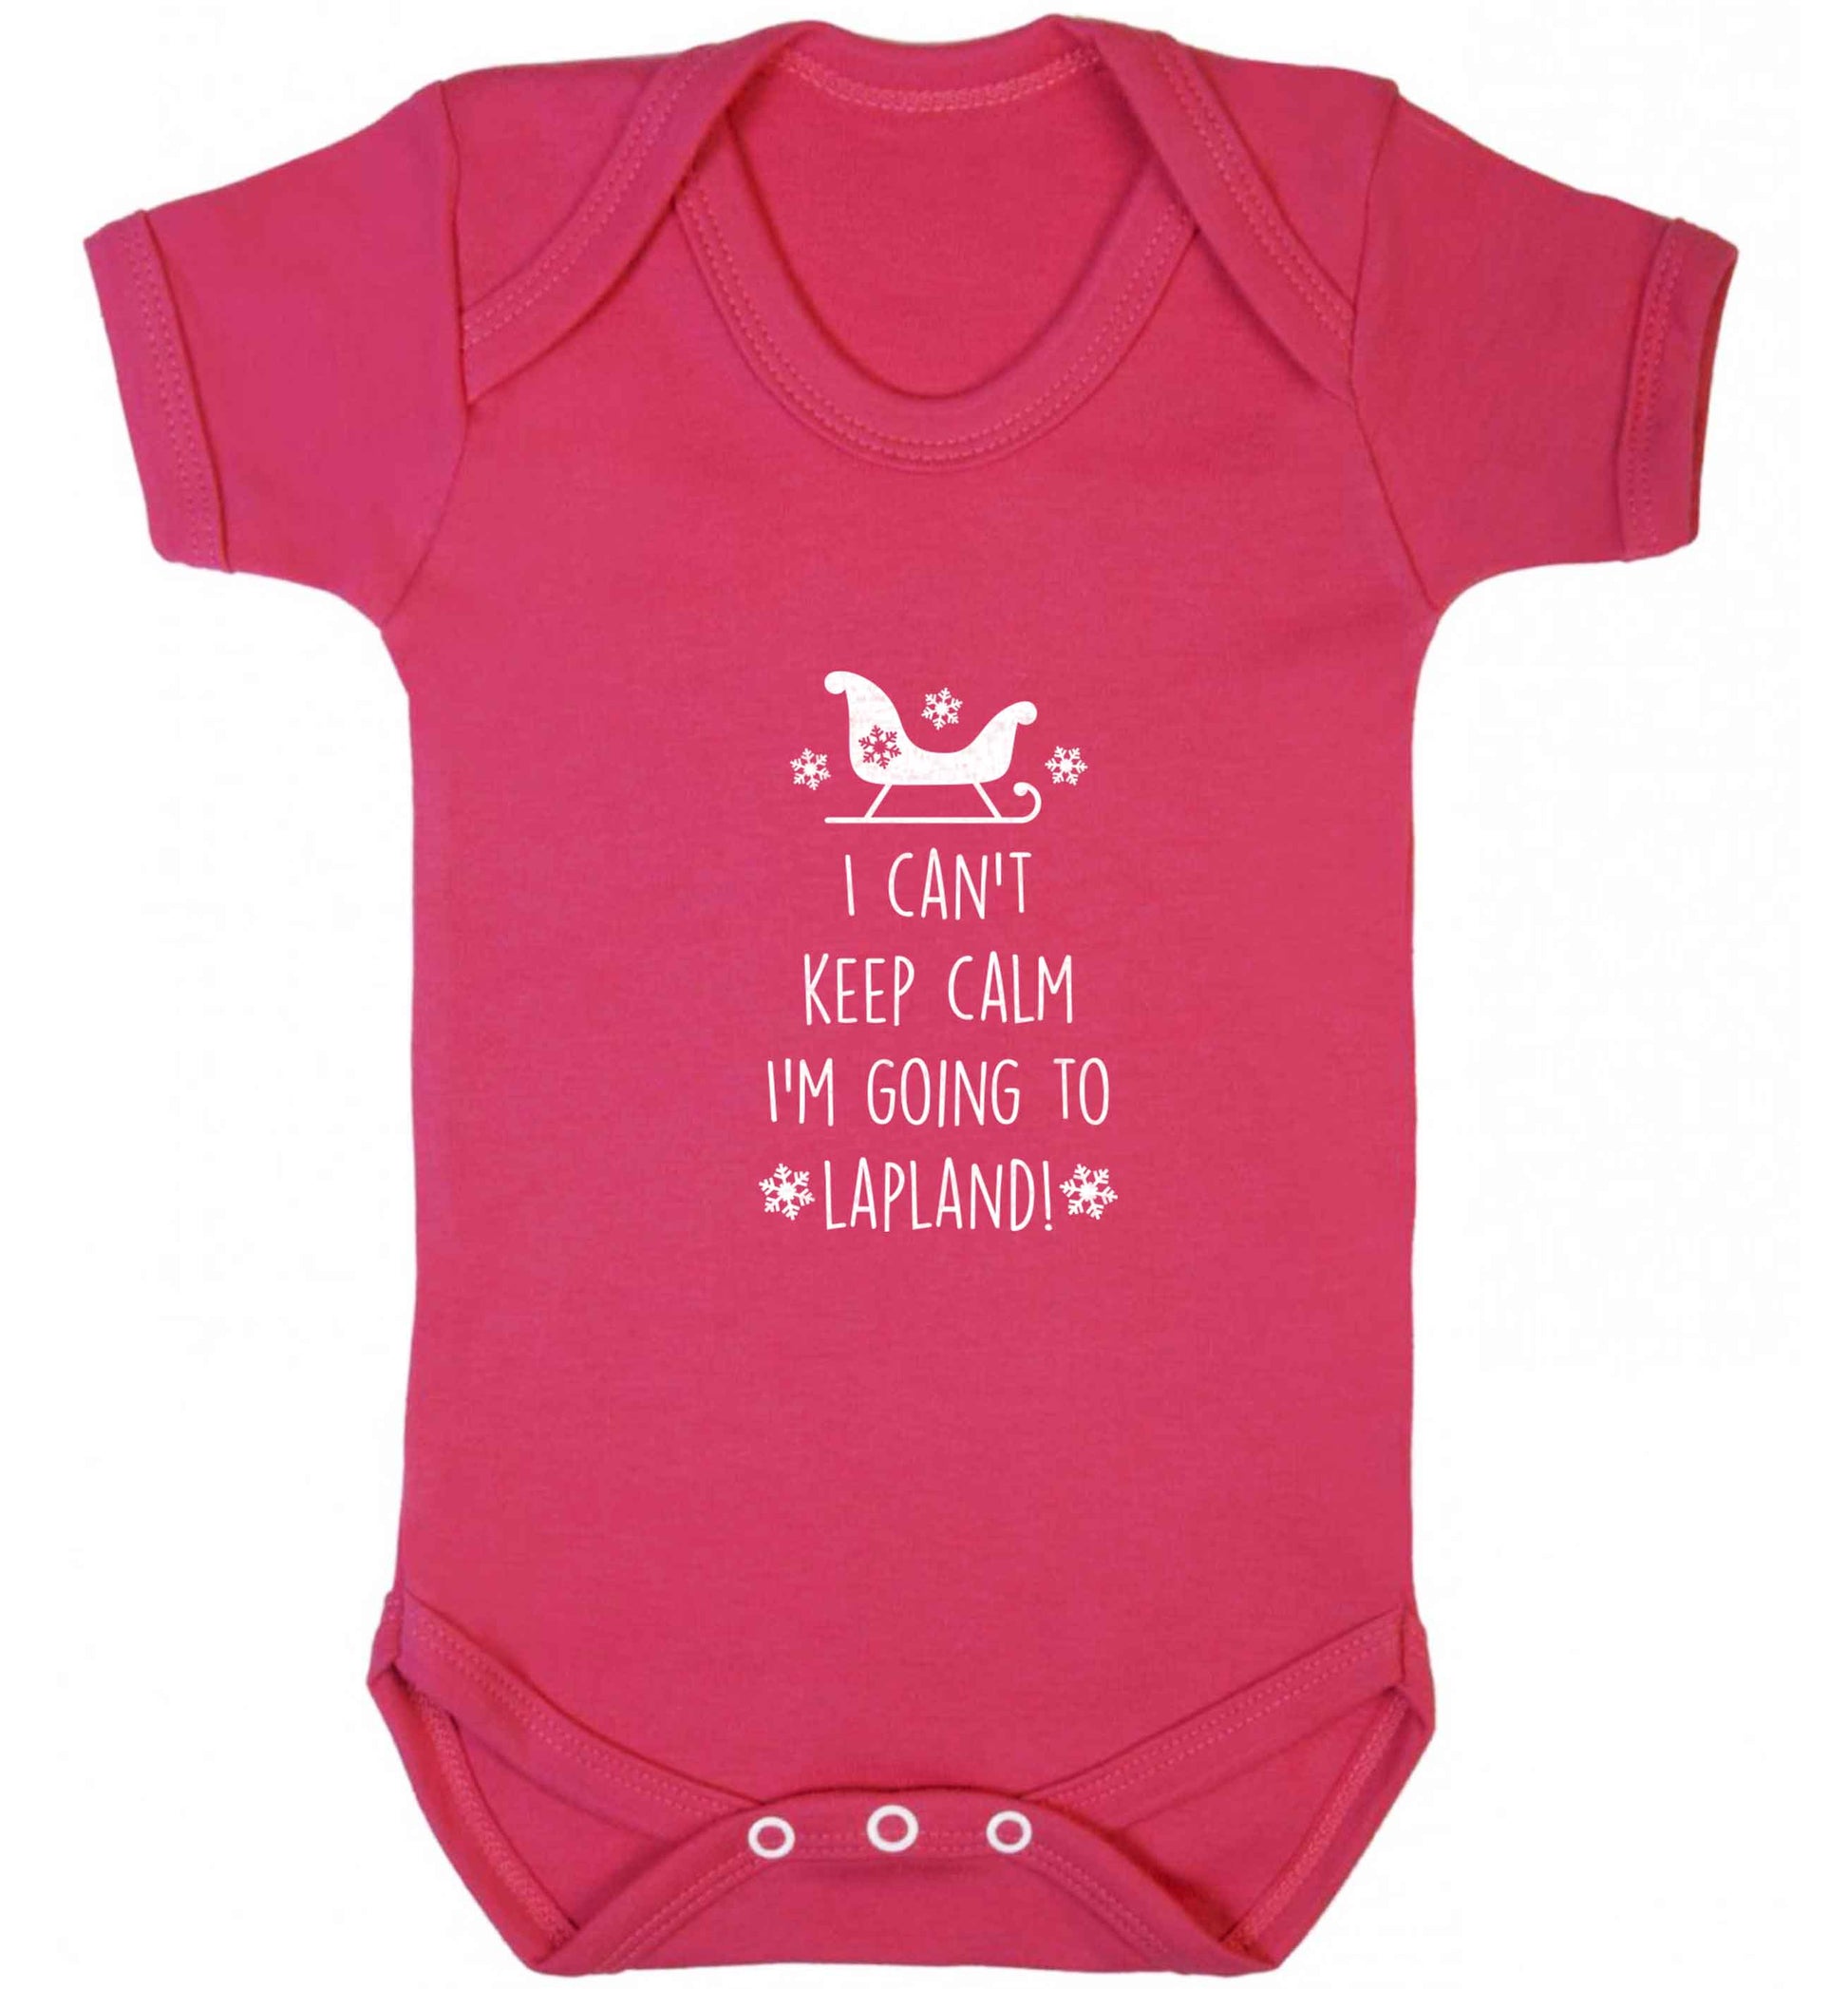 I can't keep calm I'm going to Lapland baby vest dark pink 18-24 months